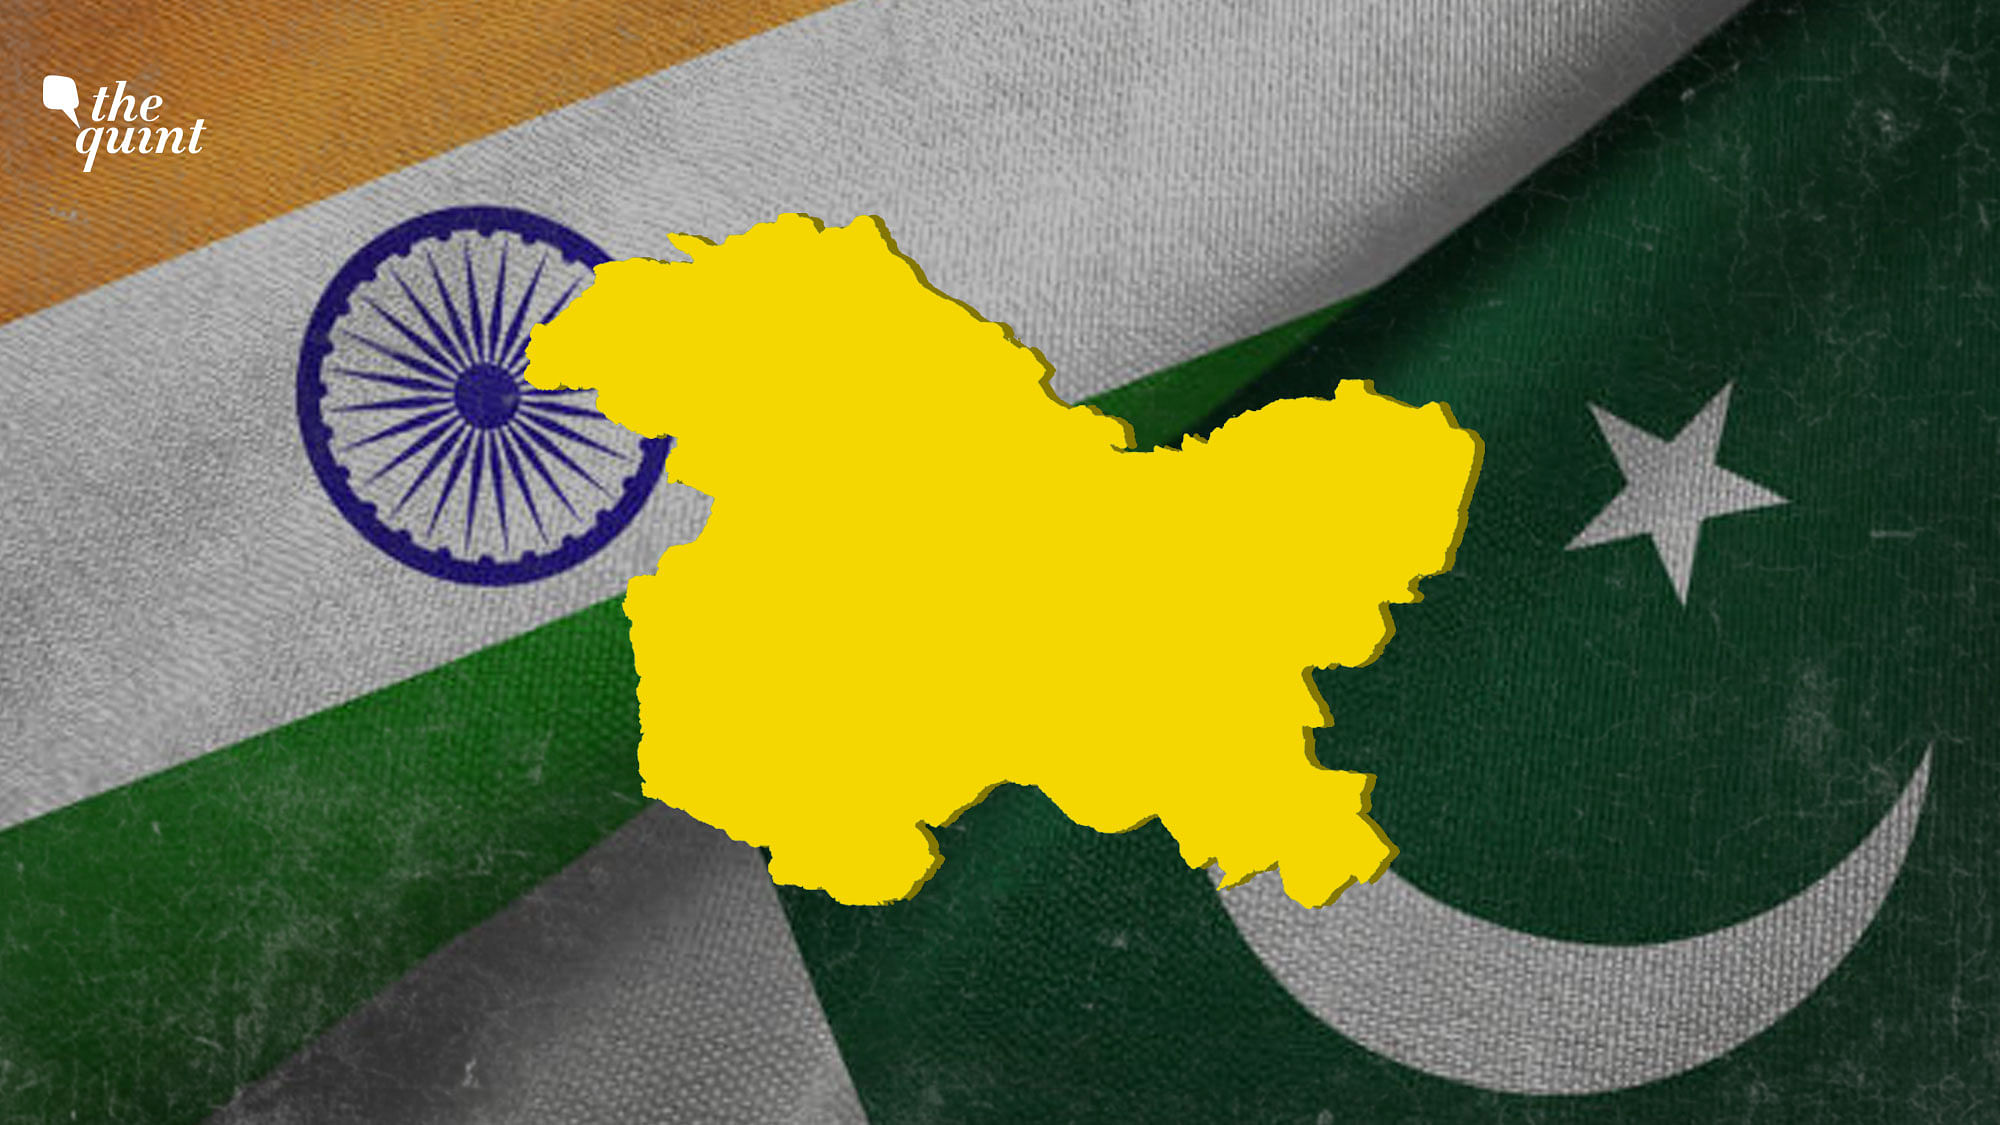 Image of India and Pakistan’s flags (background) and Kashmir map used for representational purposes.